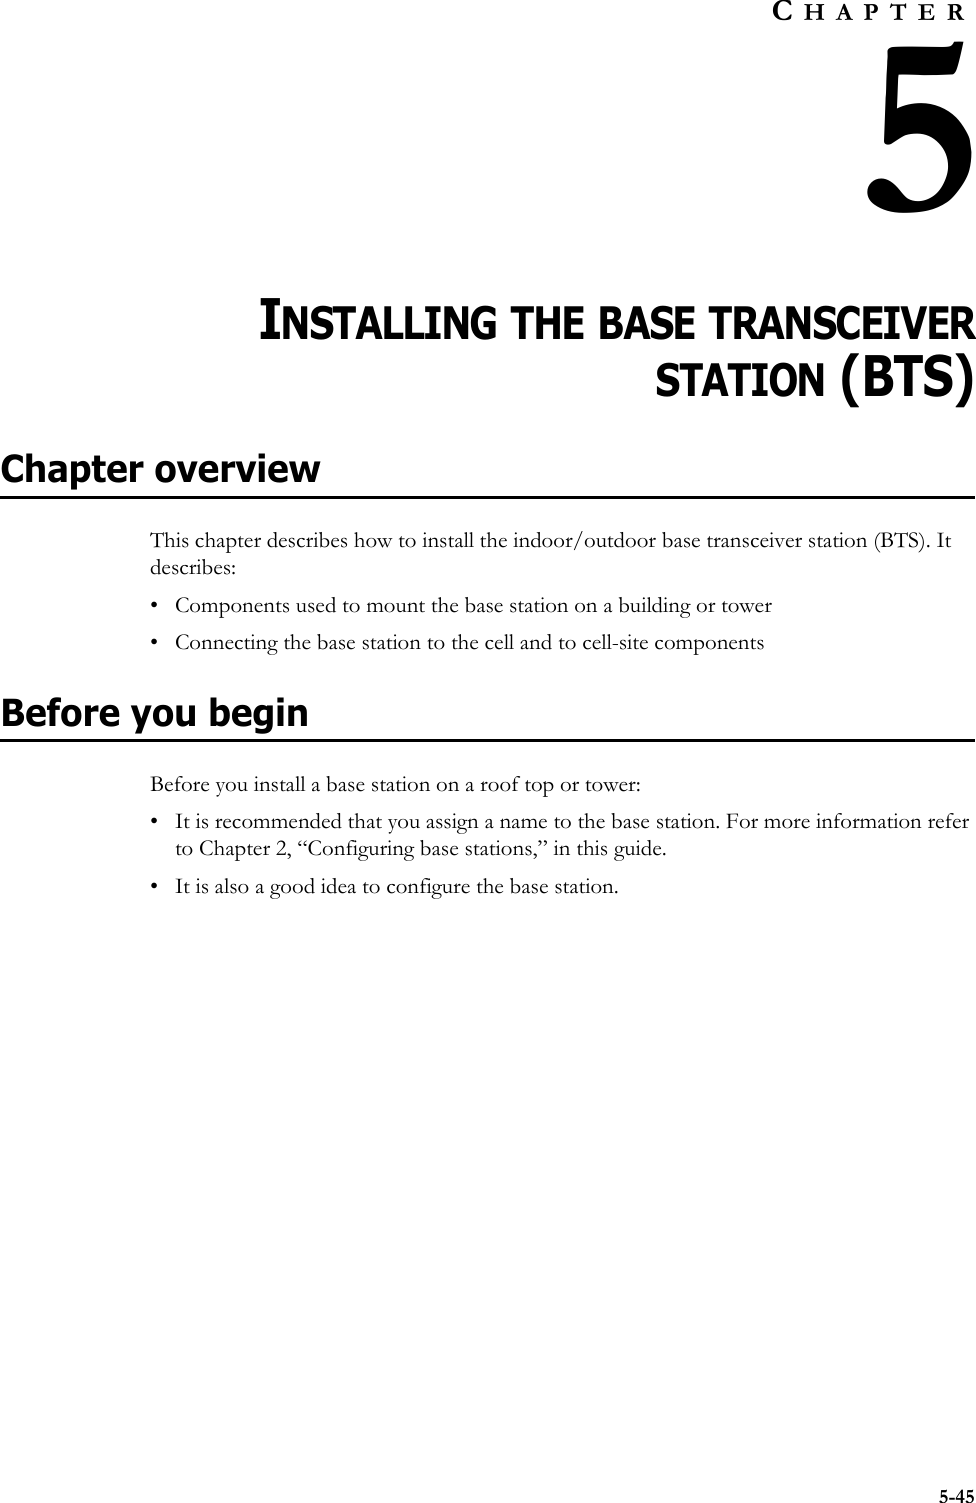 5-45CHAPTER5CHAPTER 5INSTALLING THE BASE TRANSCEIVERSTATION (BTS)Chapter overviewThis chapter describes how to install the indoor/outdoor base transceiver station (BTS). It describes:• Components used to mount the base station on a building or tower • Connecting the base station to the cell and to cell-site componentsBefore you beginBefore you install a base station on a roof top or tower:• It is recommended that you assign a name to the base station. For more information refer to Chapter 2, “Configuring base stations‚” in this guide.• It is also a good idea to configure the base station. 